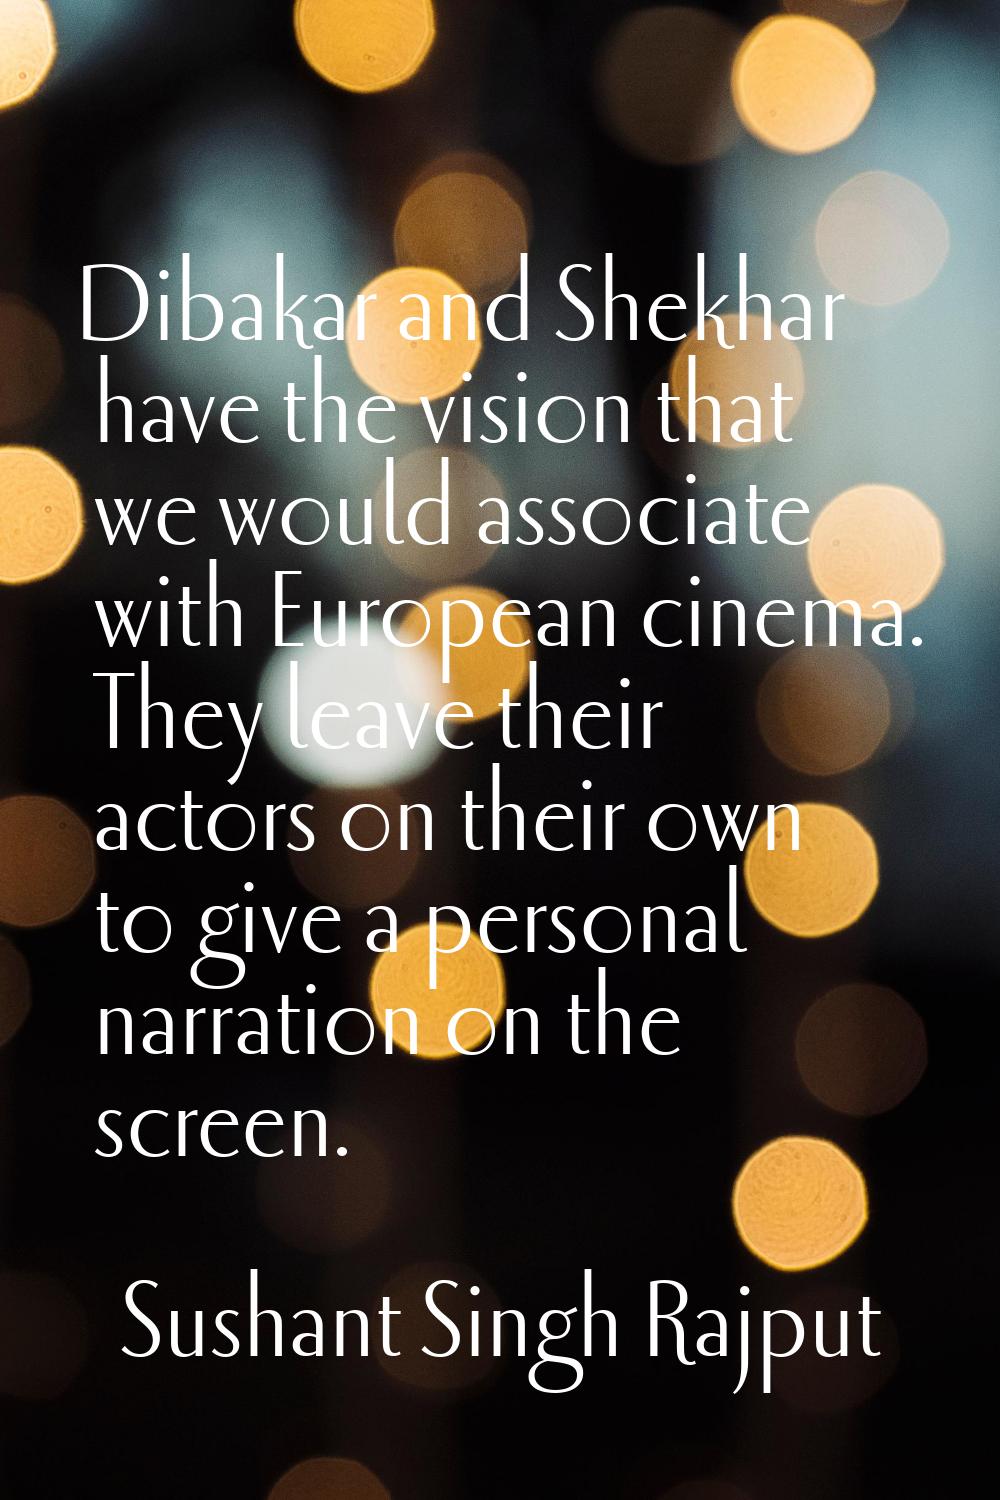 Dibakar and Shekhar have the vision that we would associate with European cinema. They leave their 